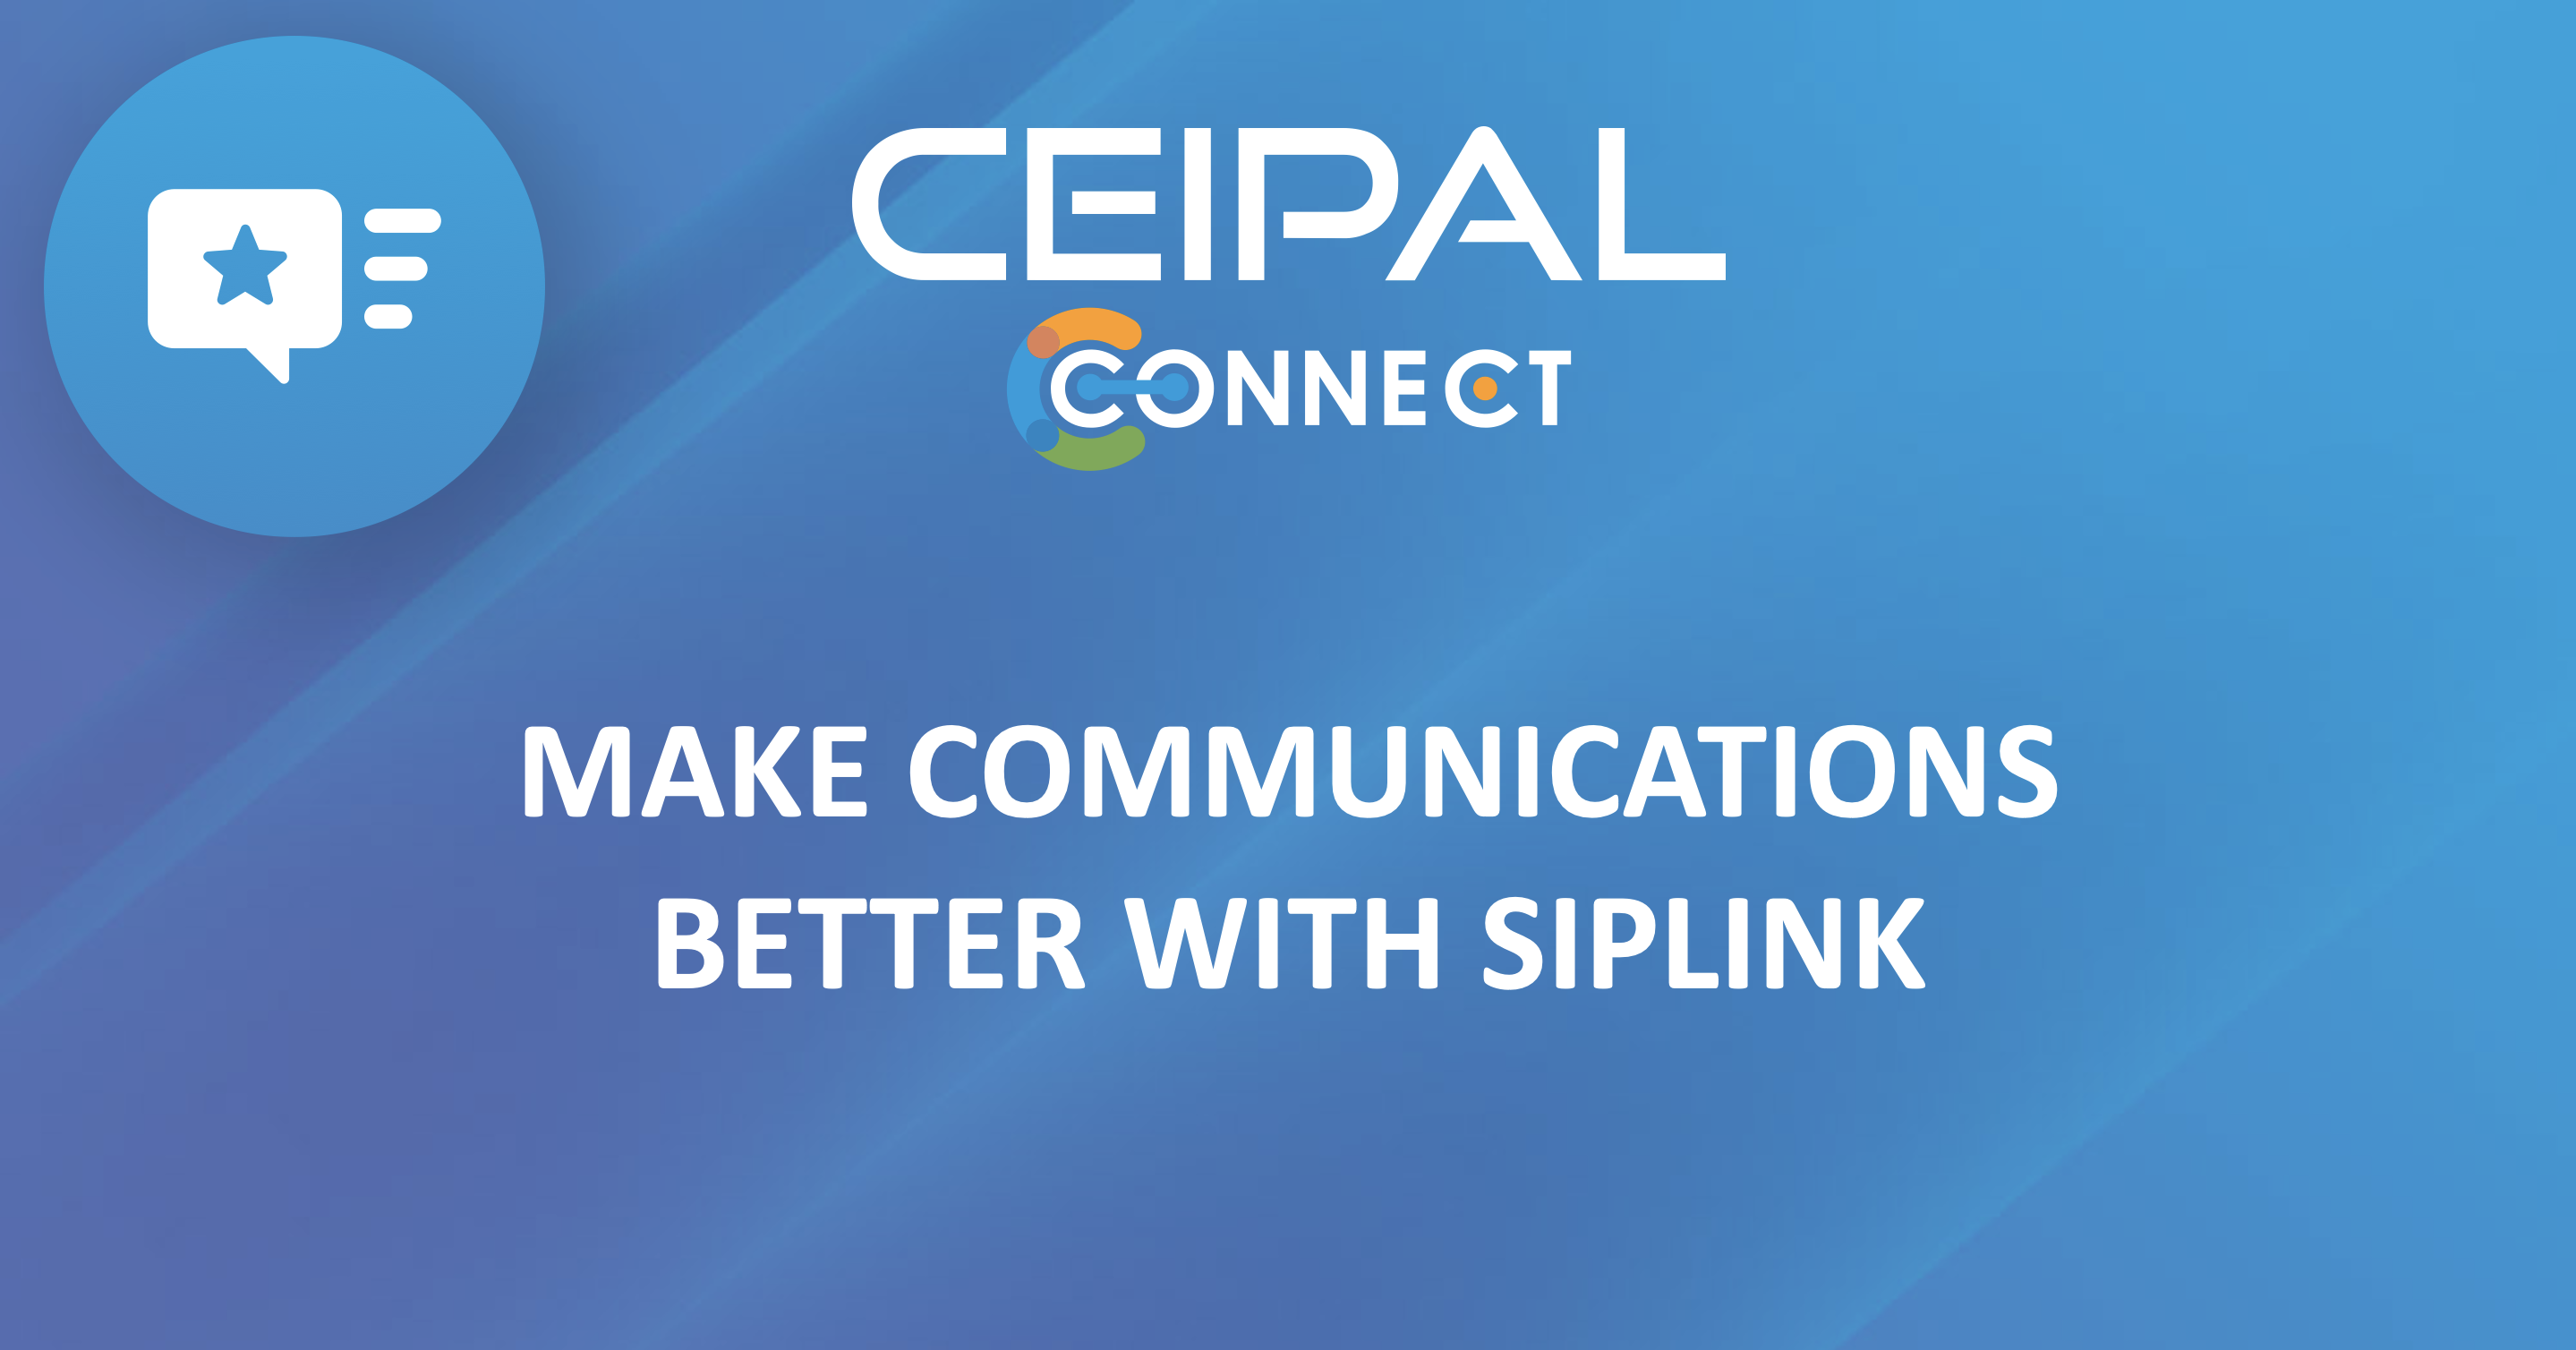 Make Communications Better with SIPLINK